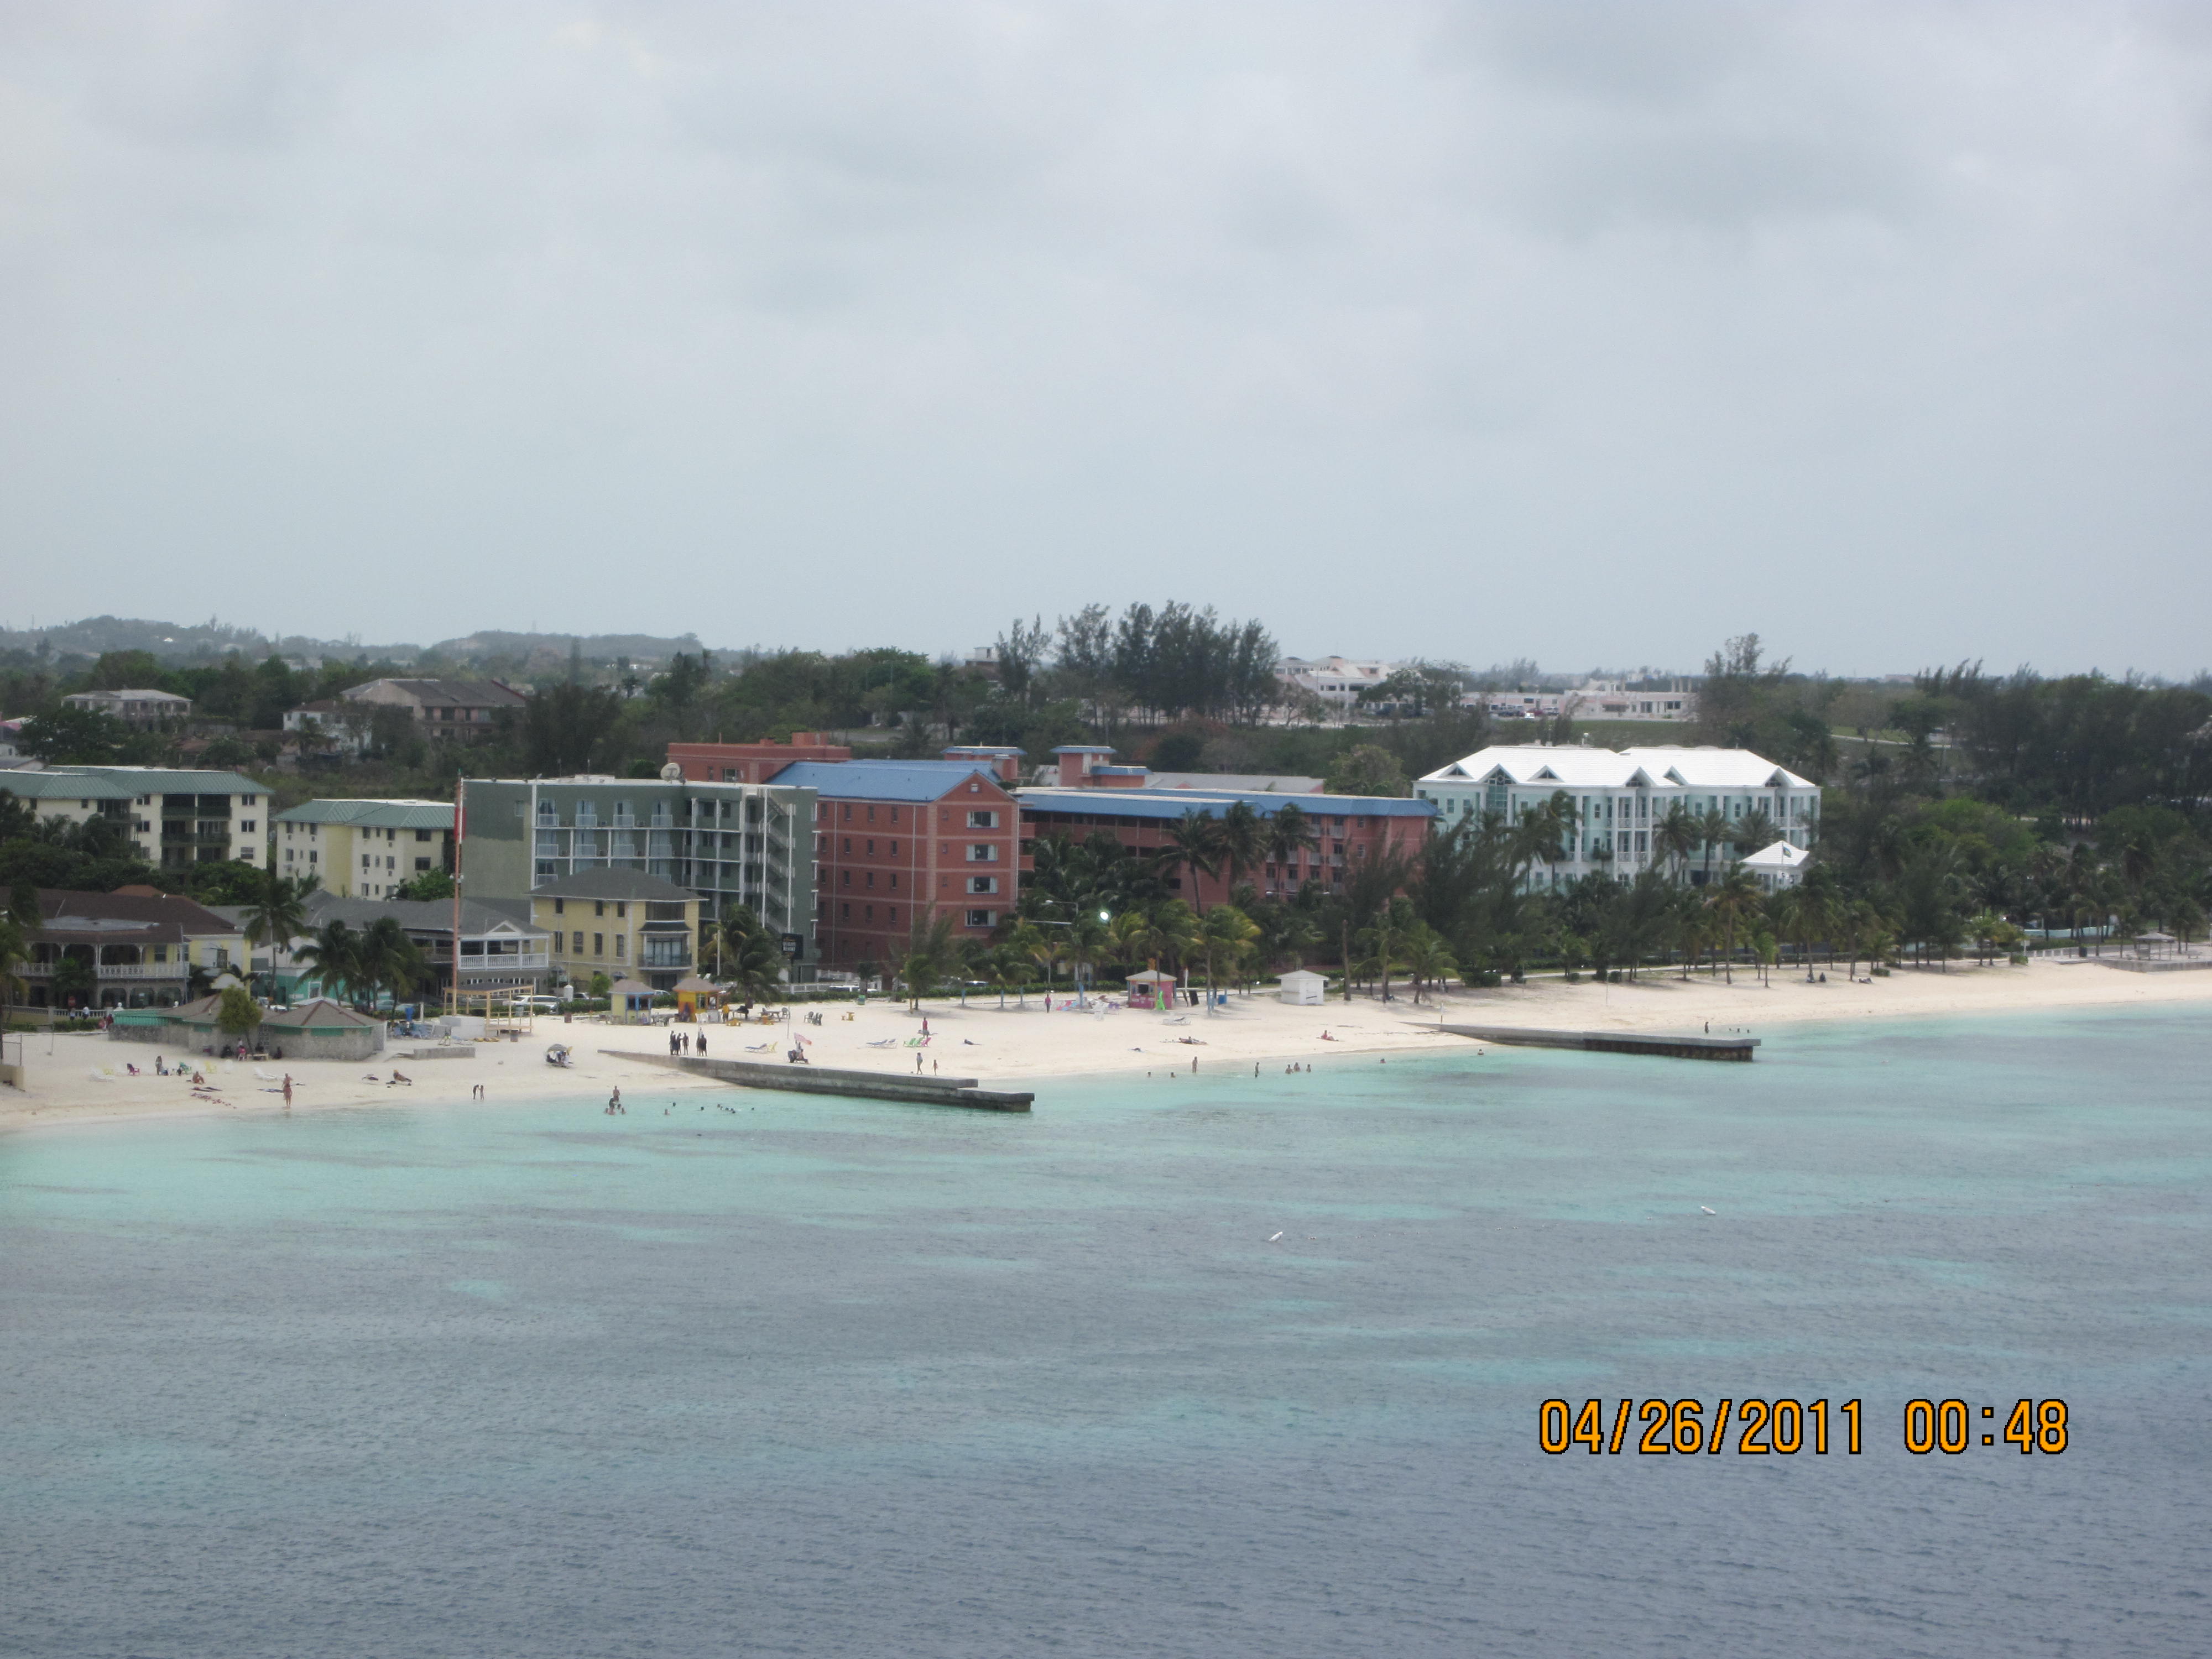 View of Nassau from the boat